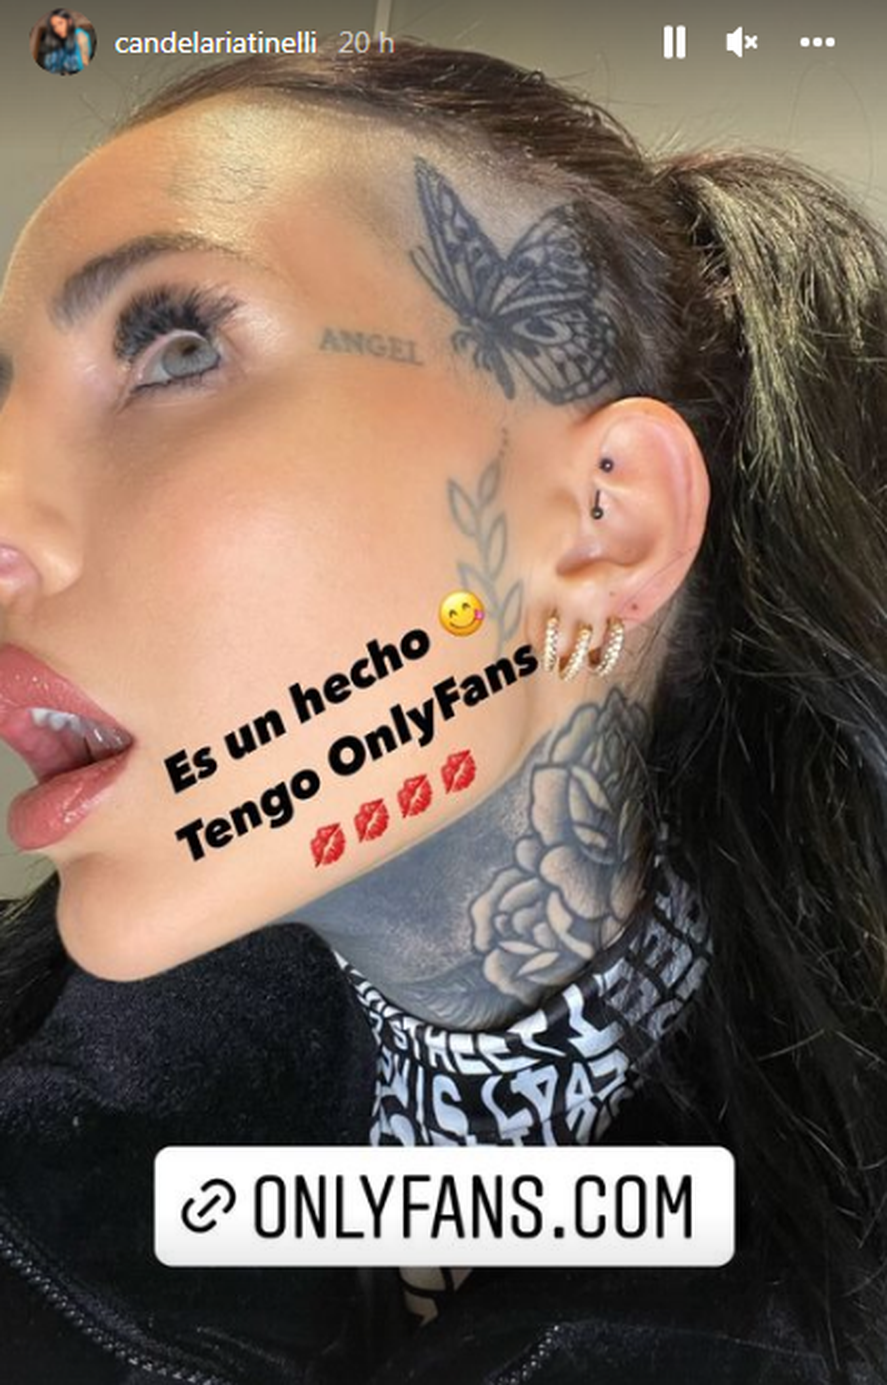 Cande Tinelli se suma a OnlyFans